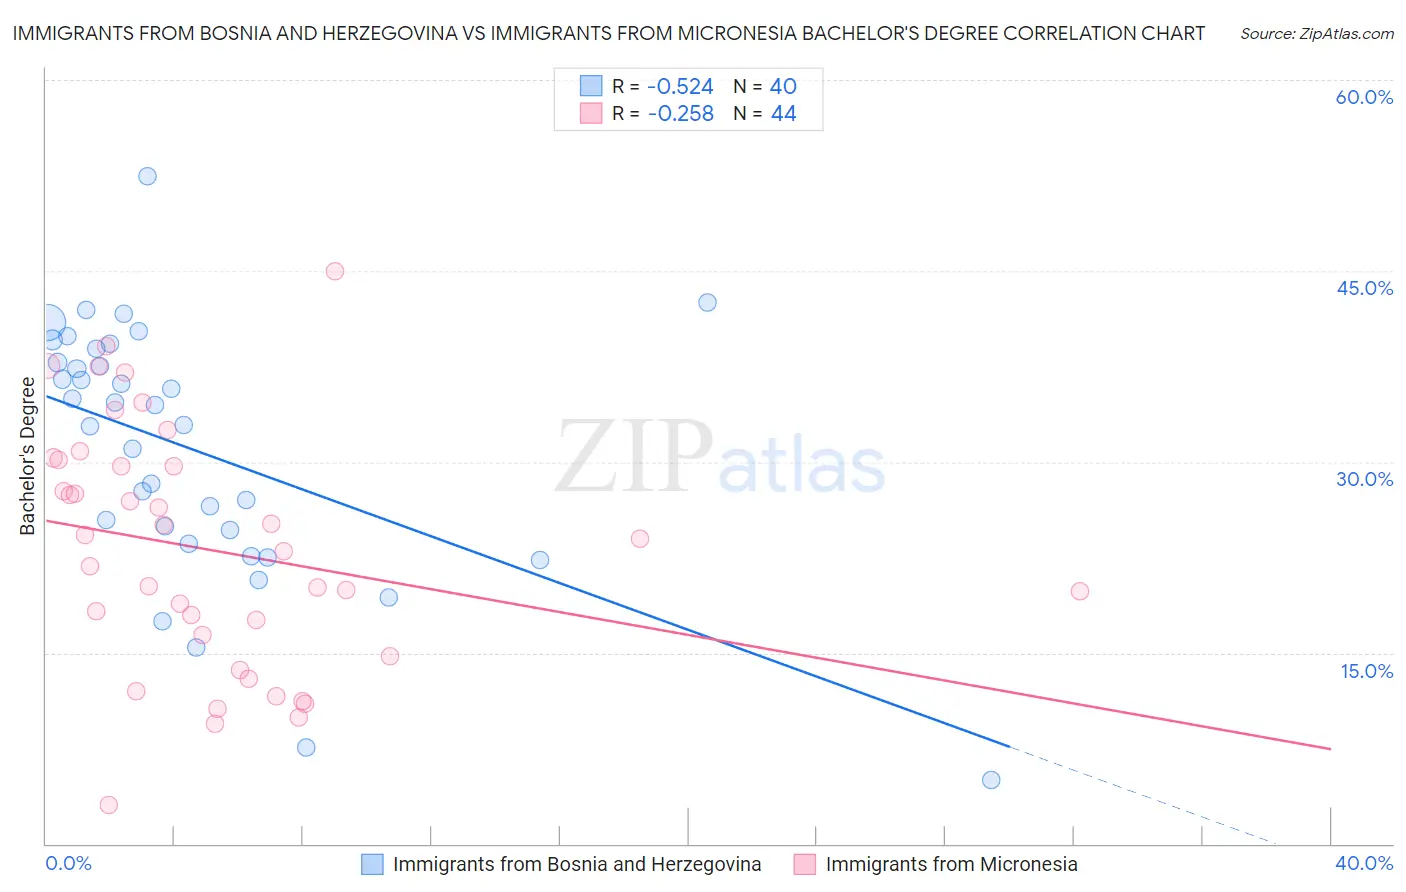 Immigrants from Bosnia and Herzegovina vs Immigrants from Micronesia Bachelor's Degree